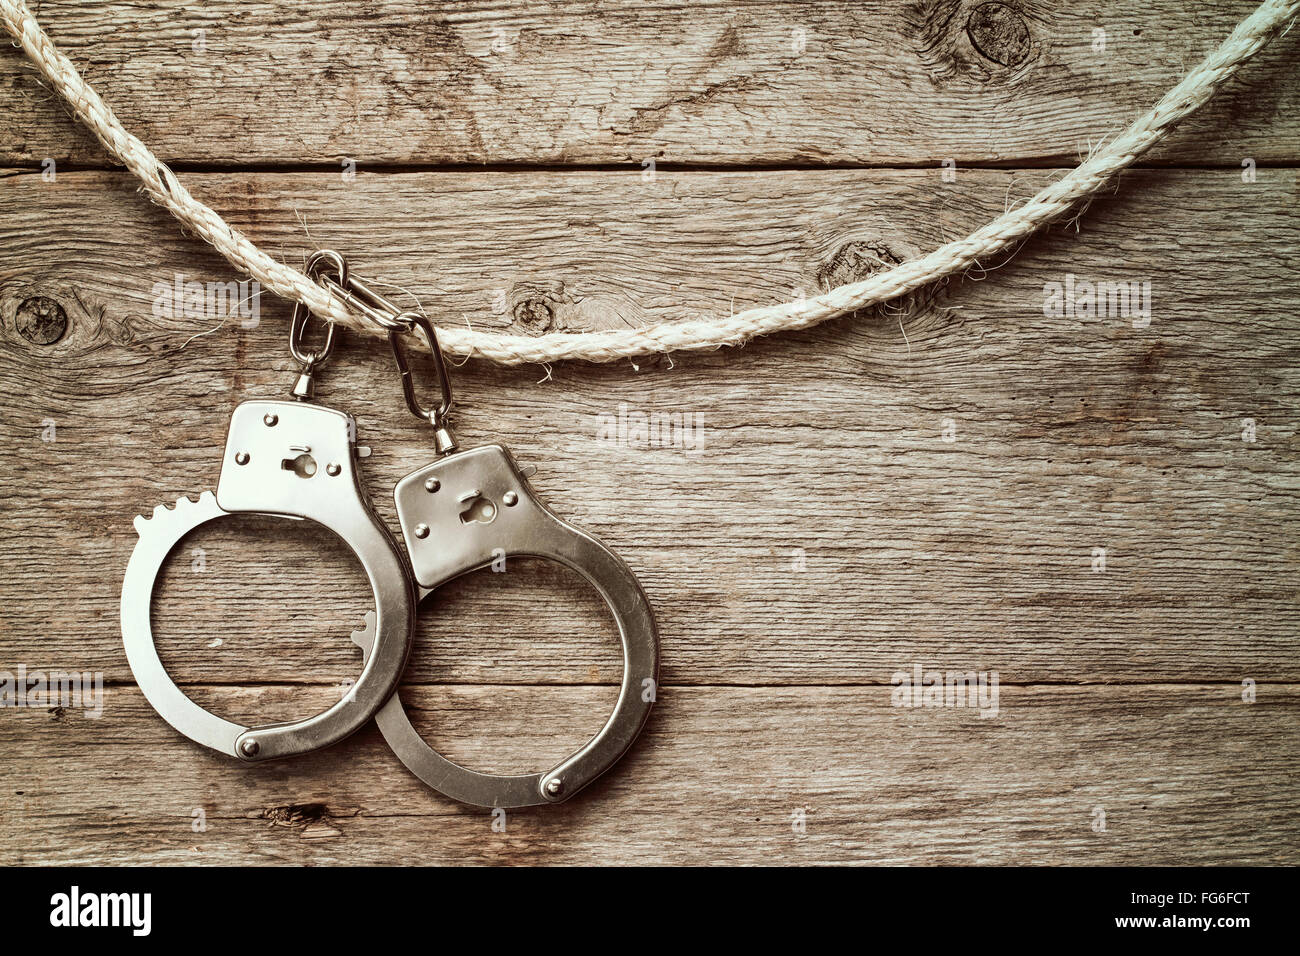 Handcuffs hanging on the rope against old wooden wall. Stock Photo